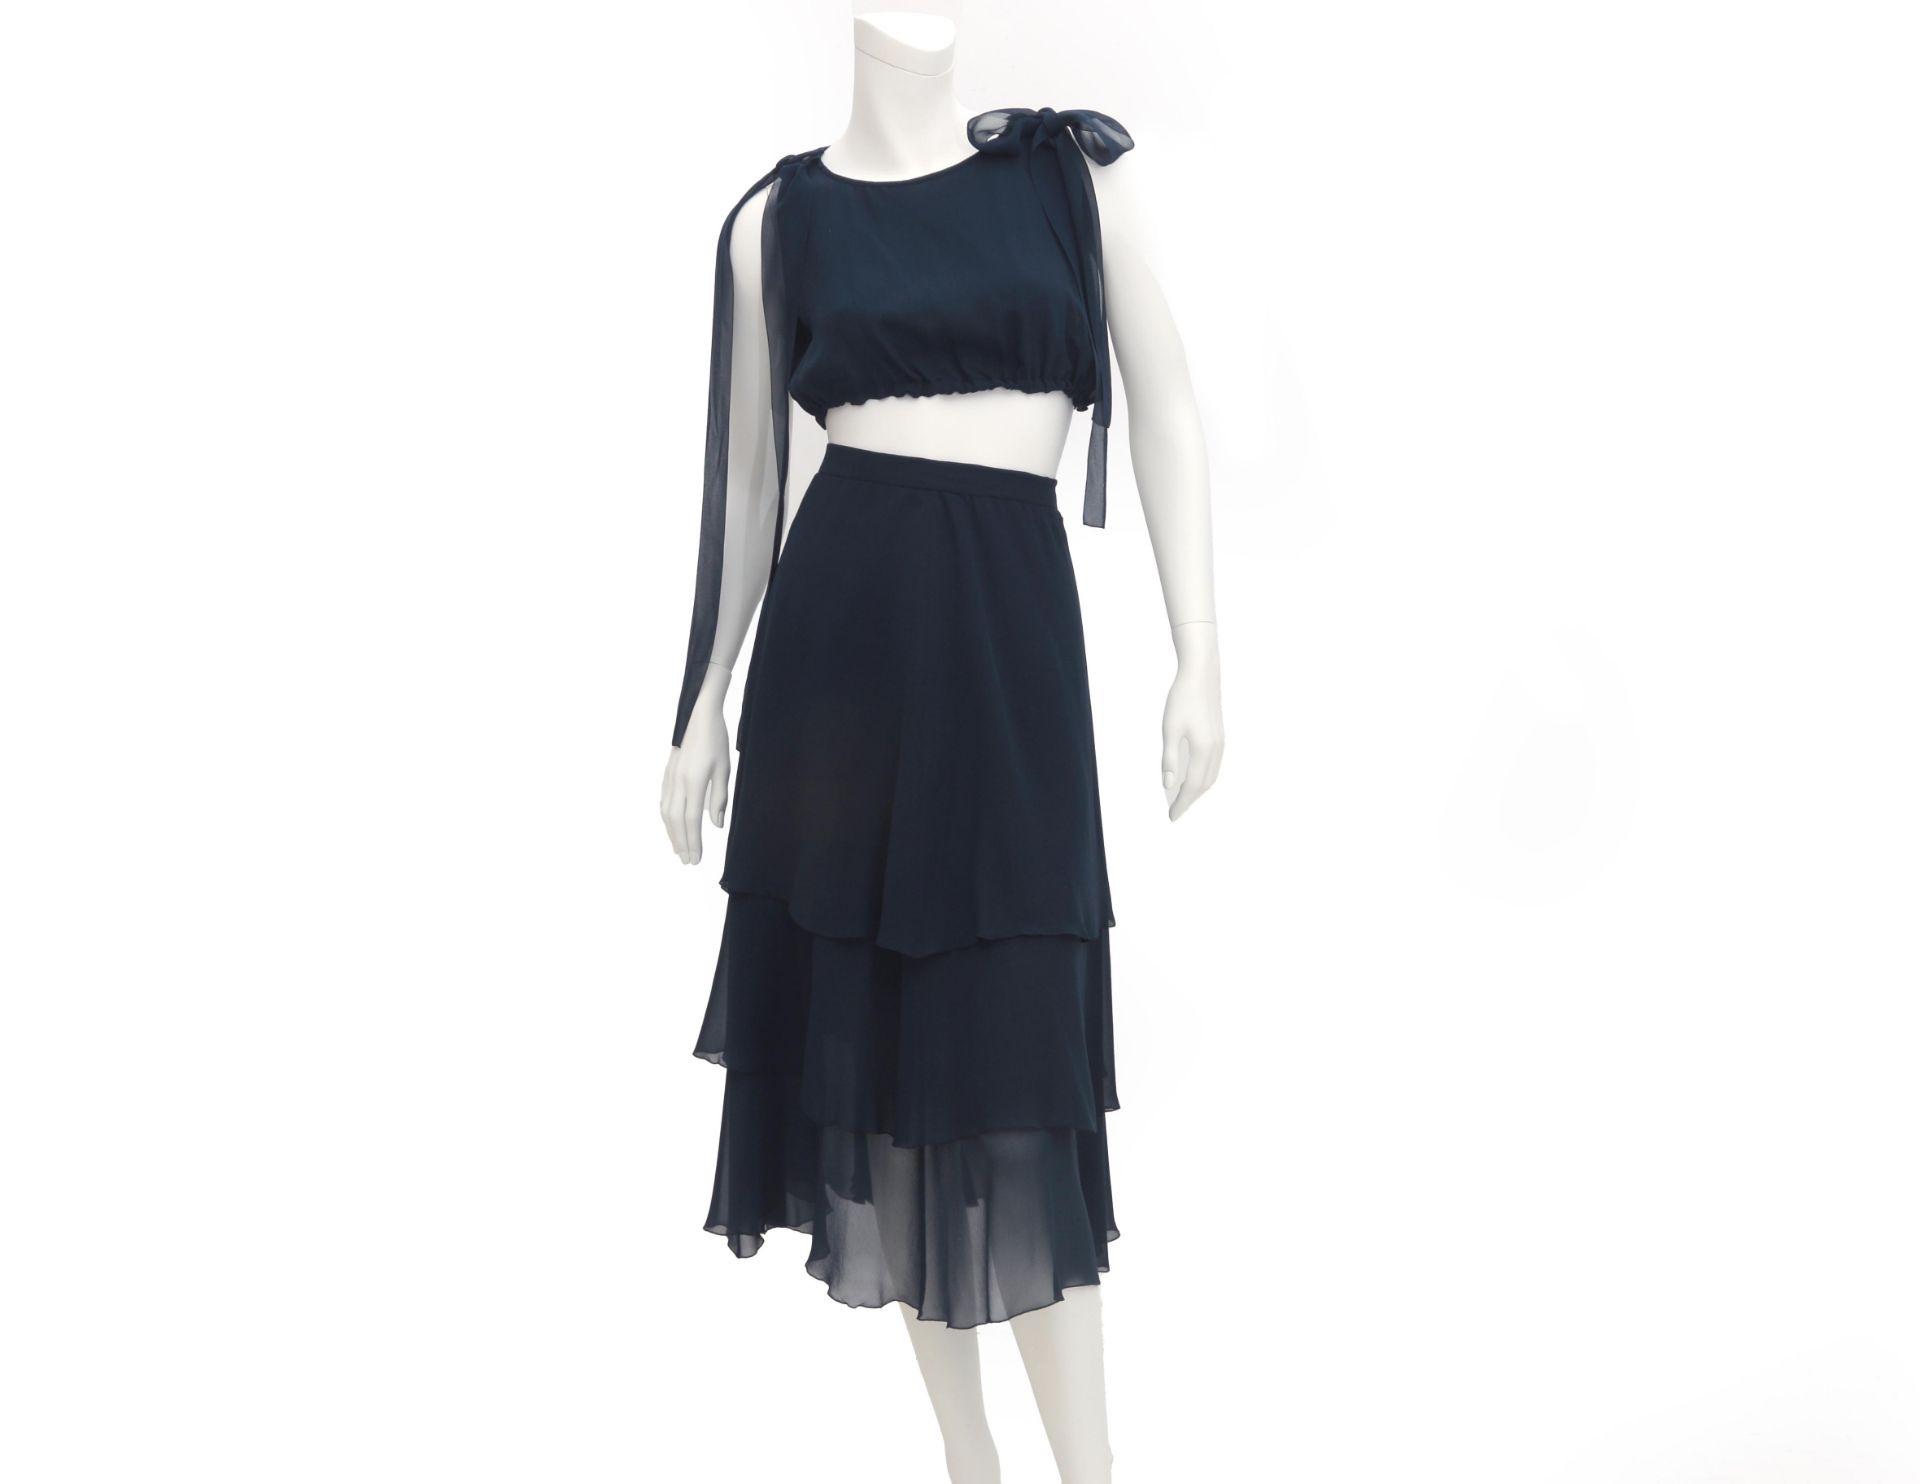 A navy blue Boutique ensemble. Composed of a short top that cab be worn with two bows at the